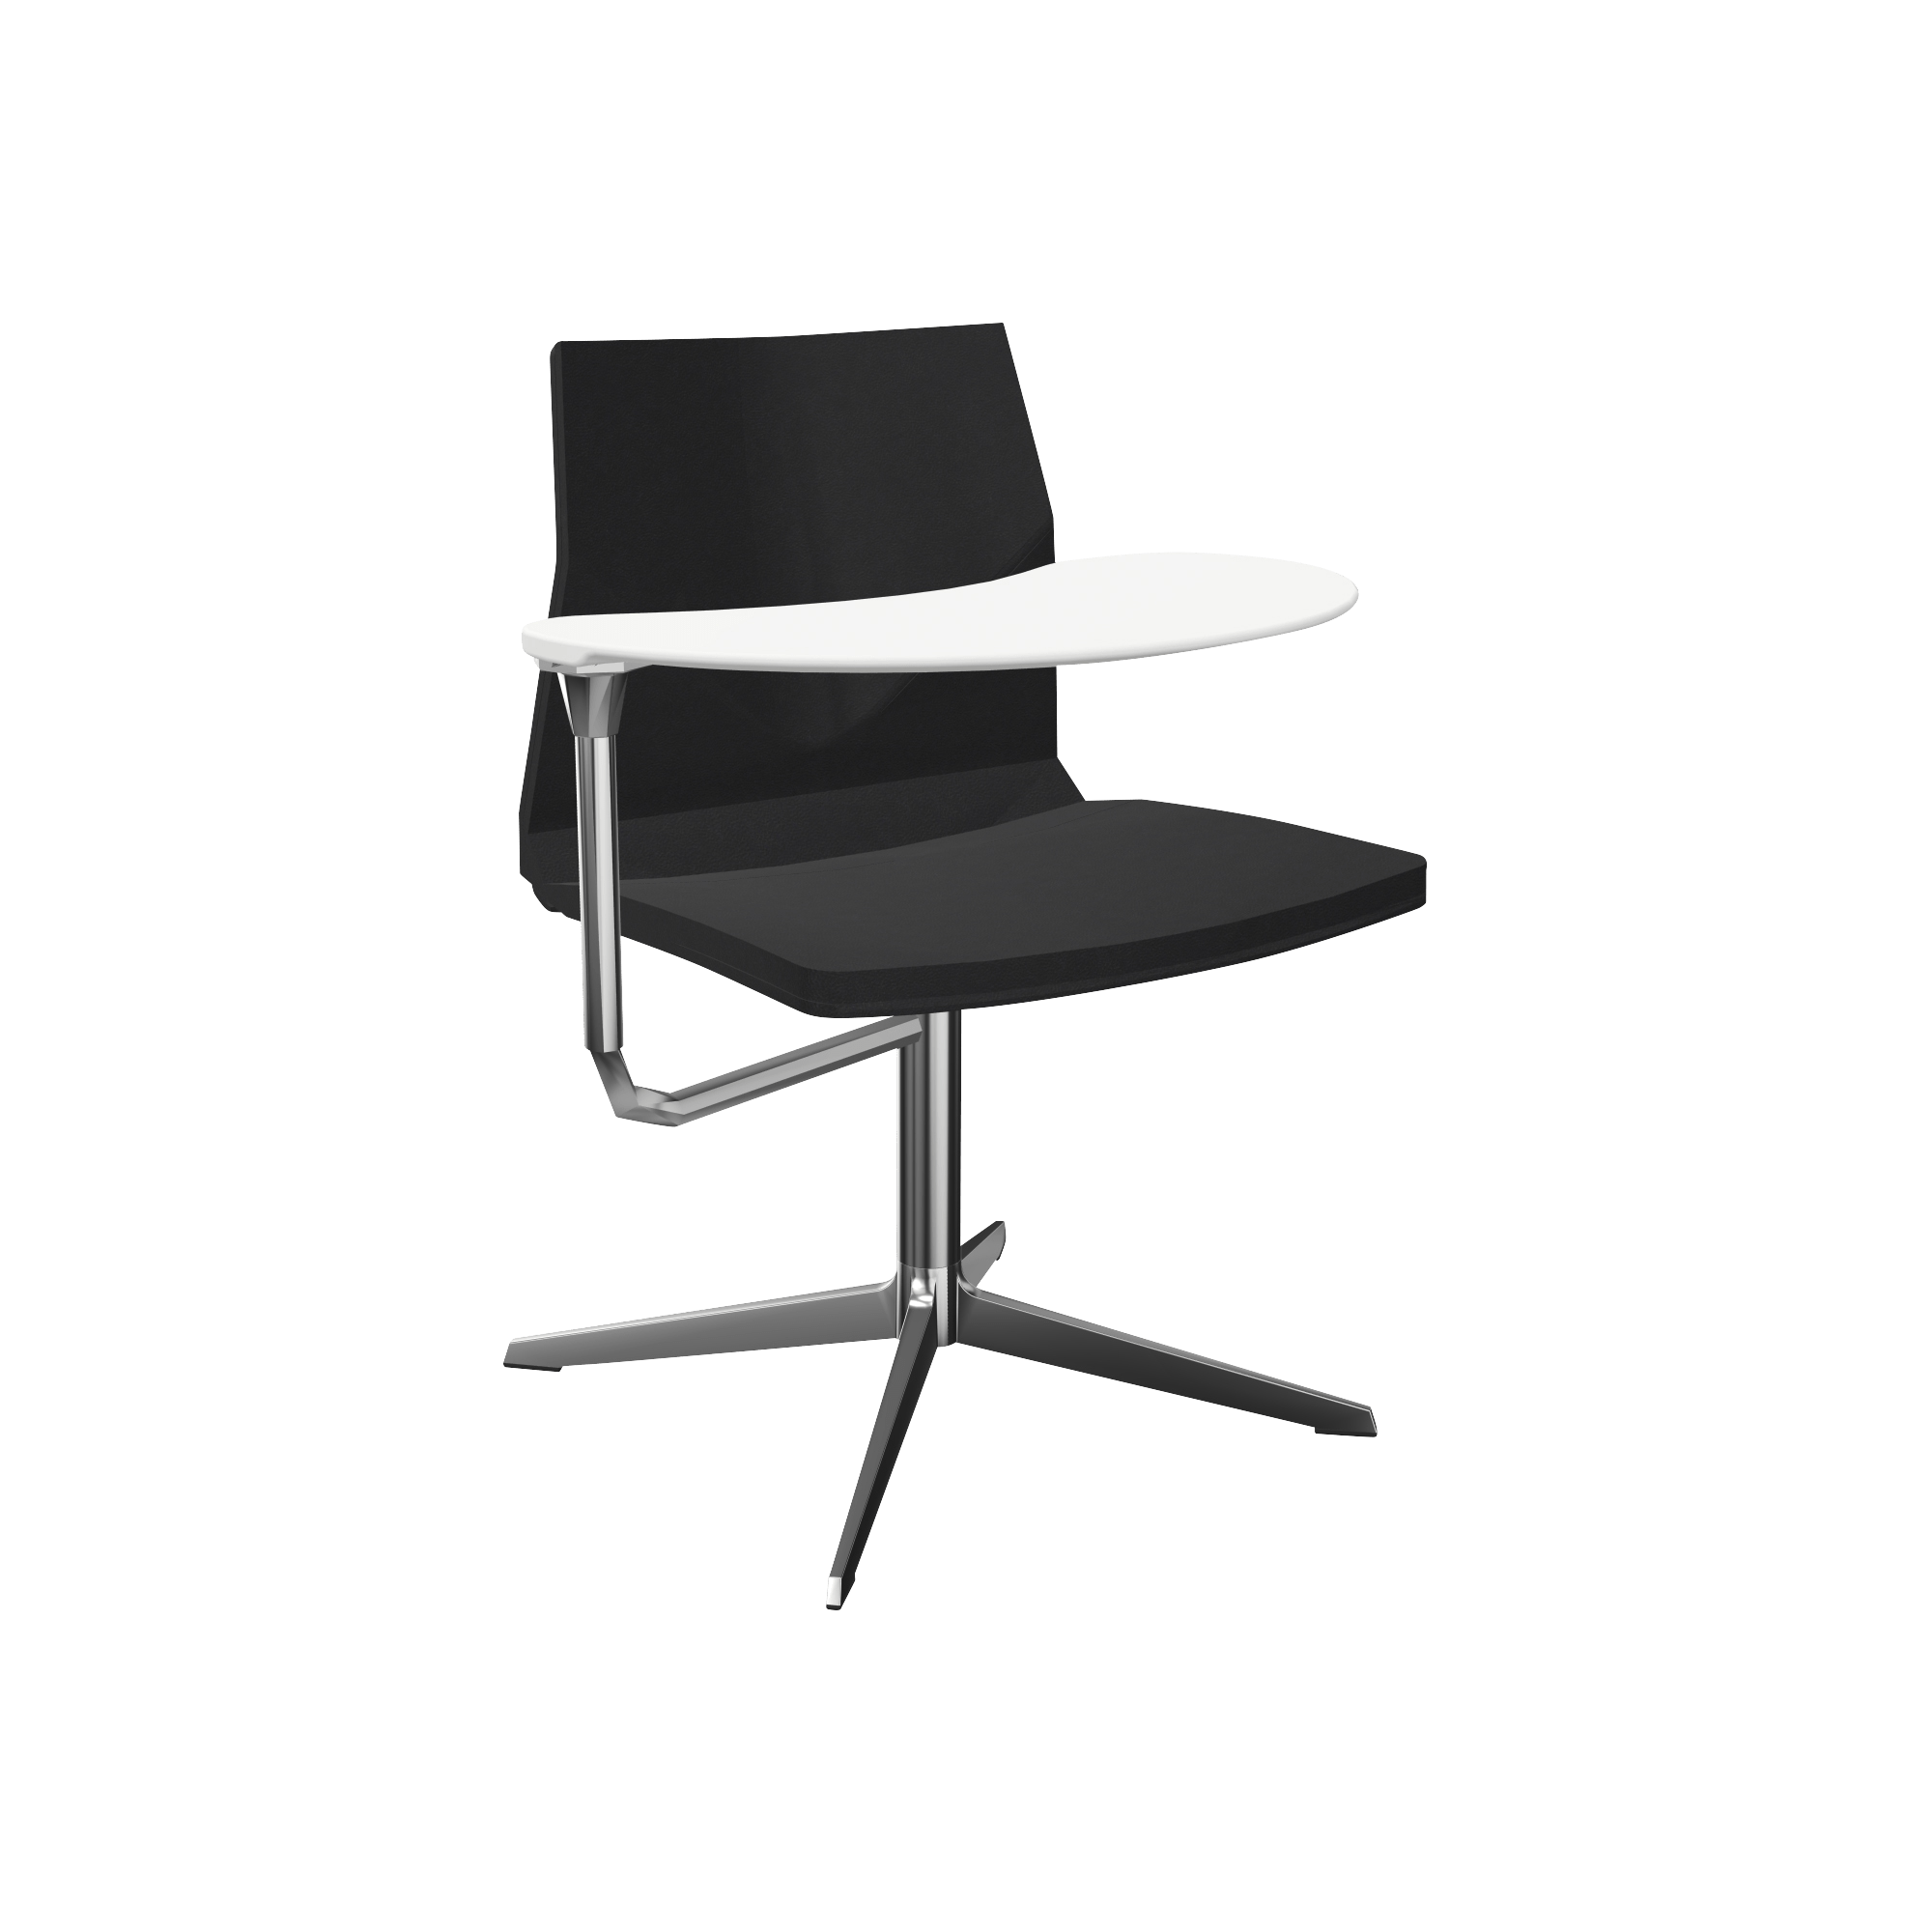 Black chair with white laptop tray attached and chrome pedestal leg